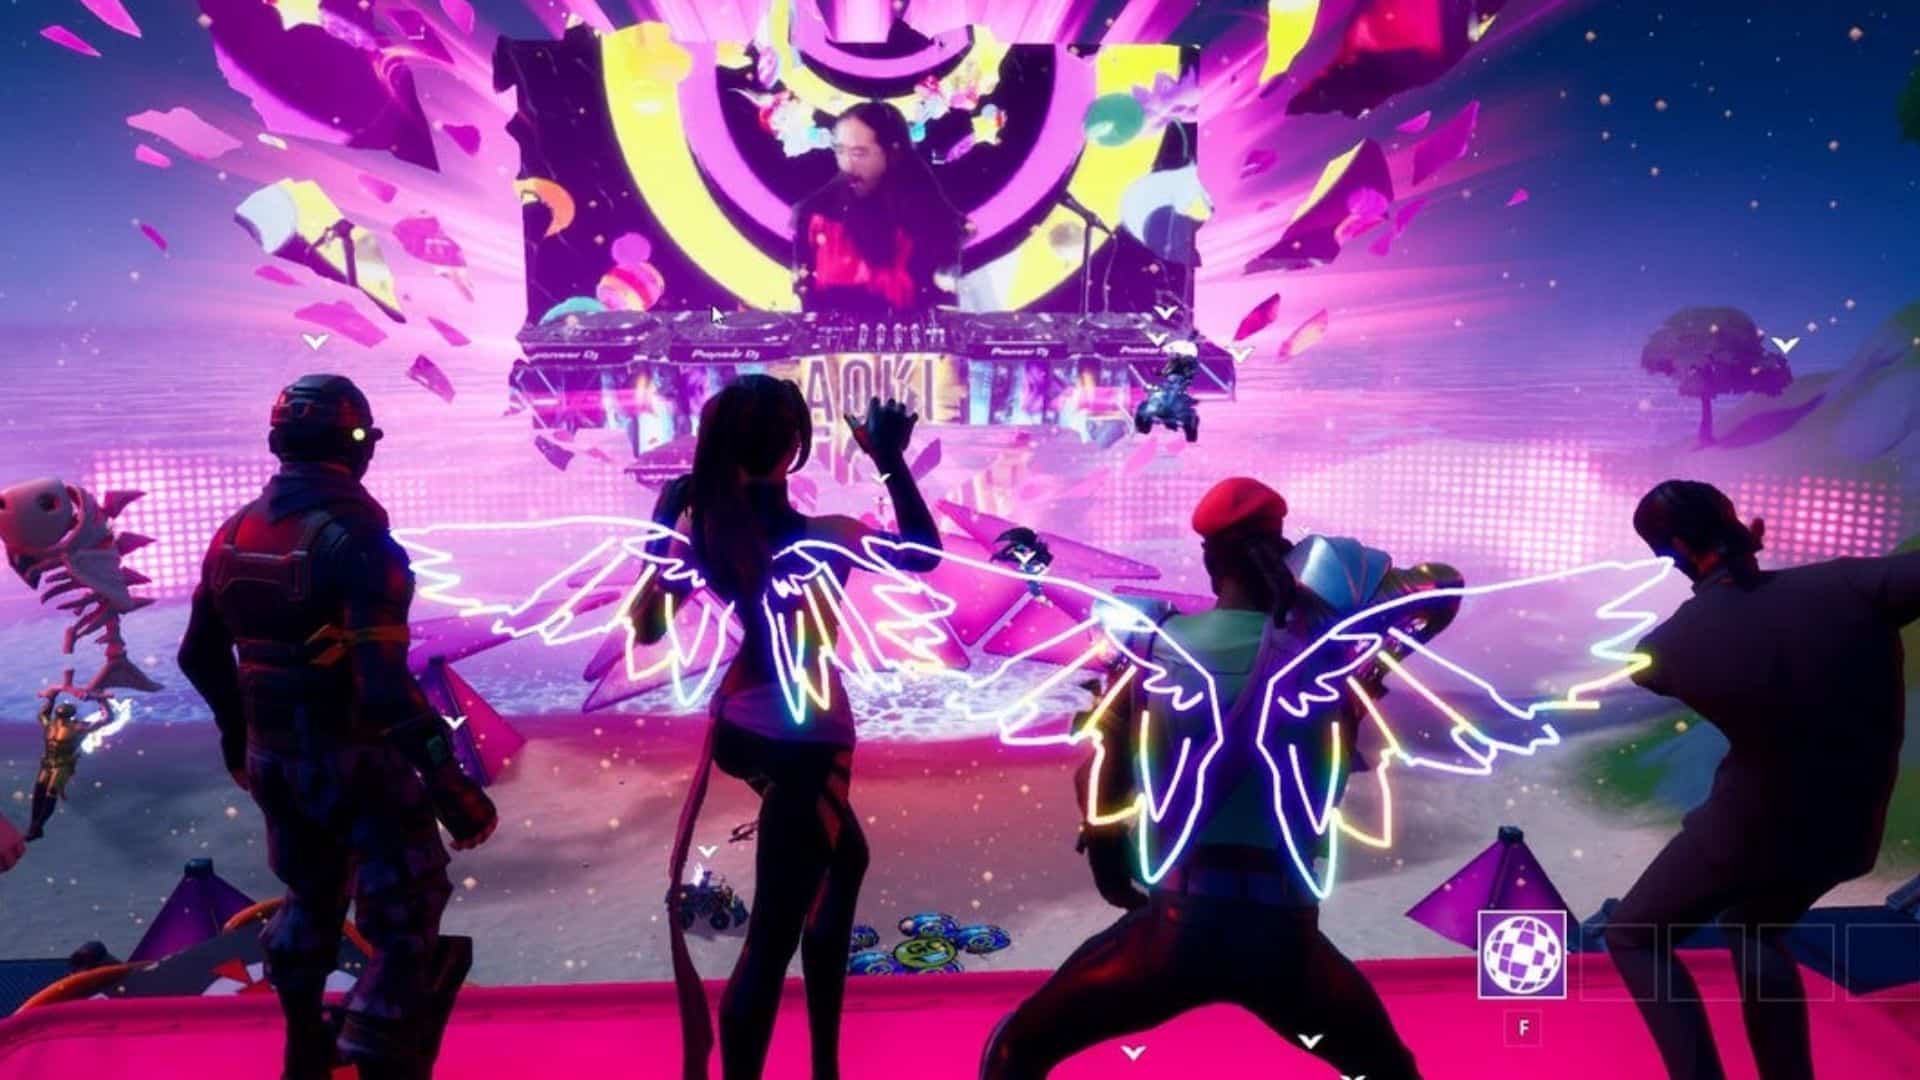 concert taking place in fortnite's party royale mode